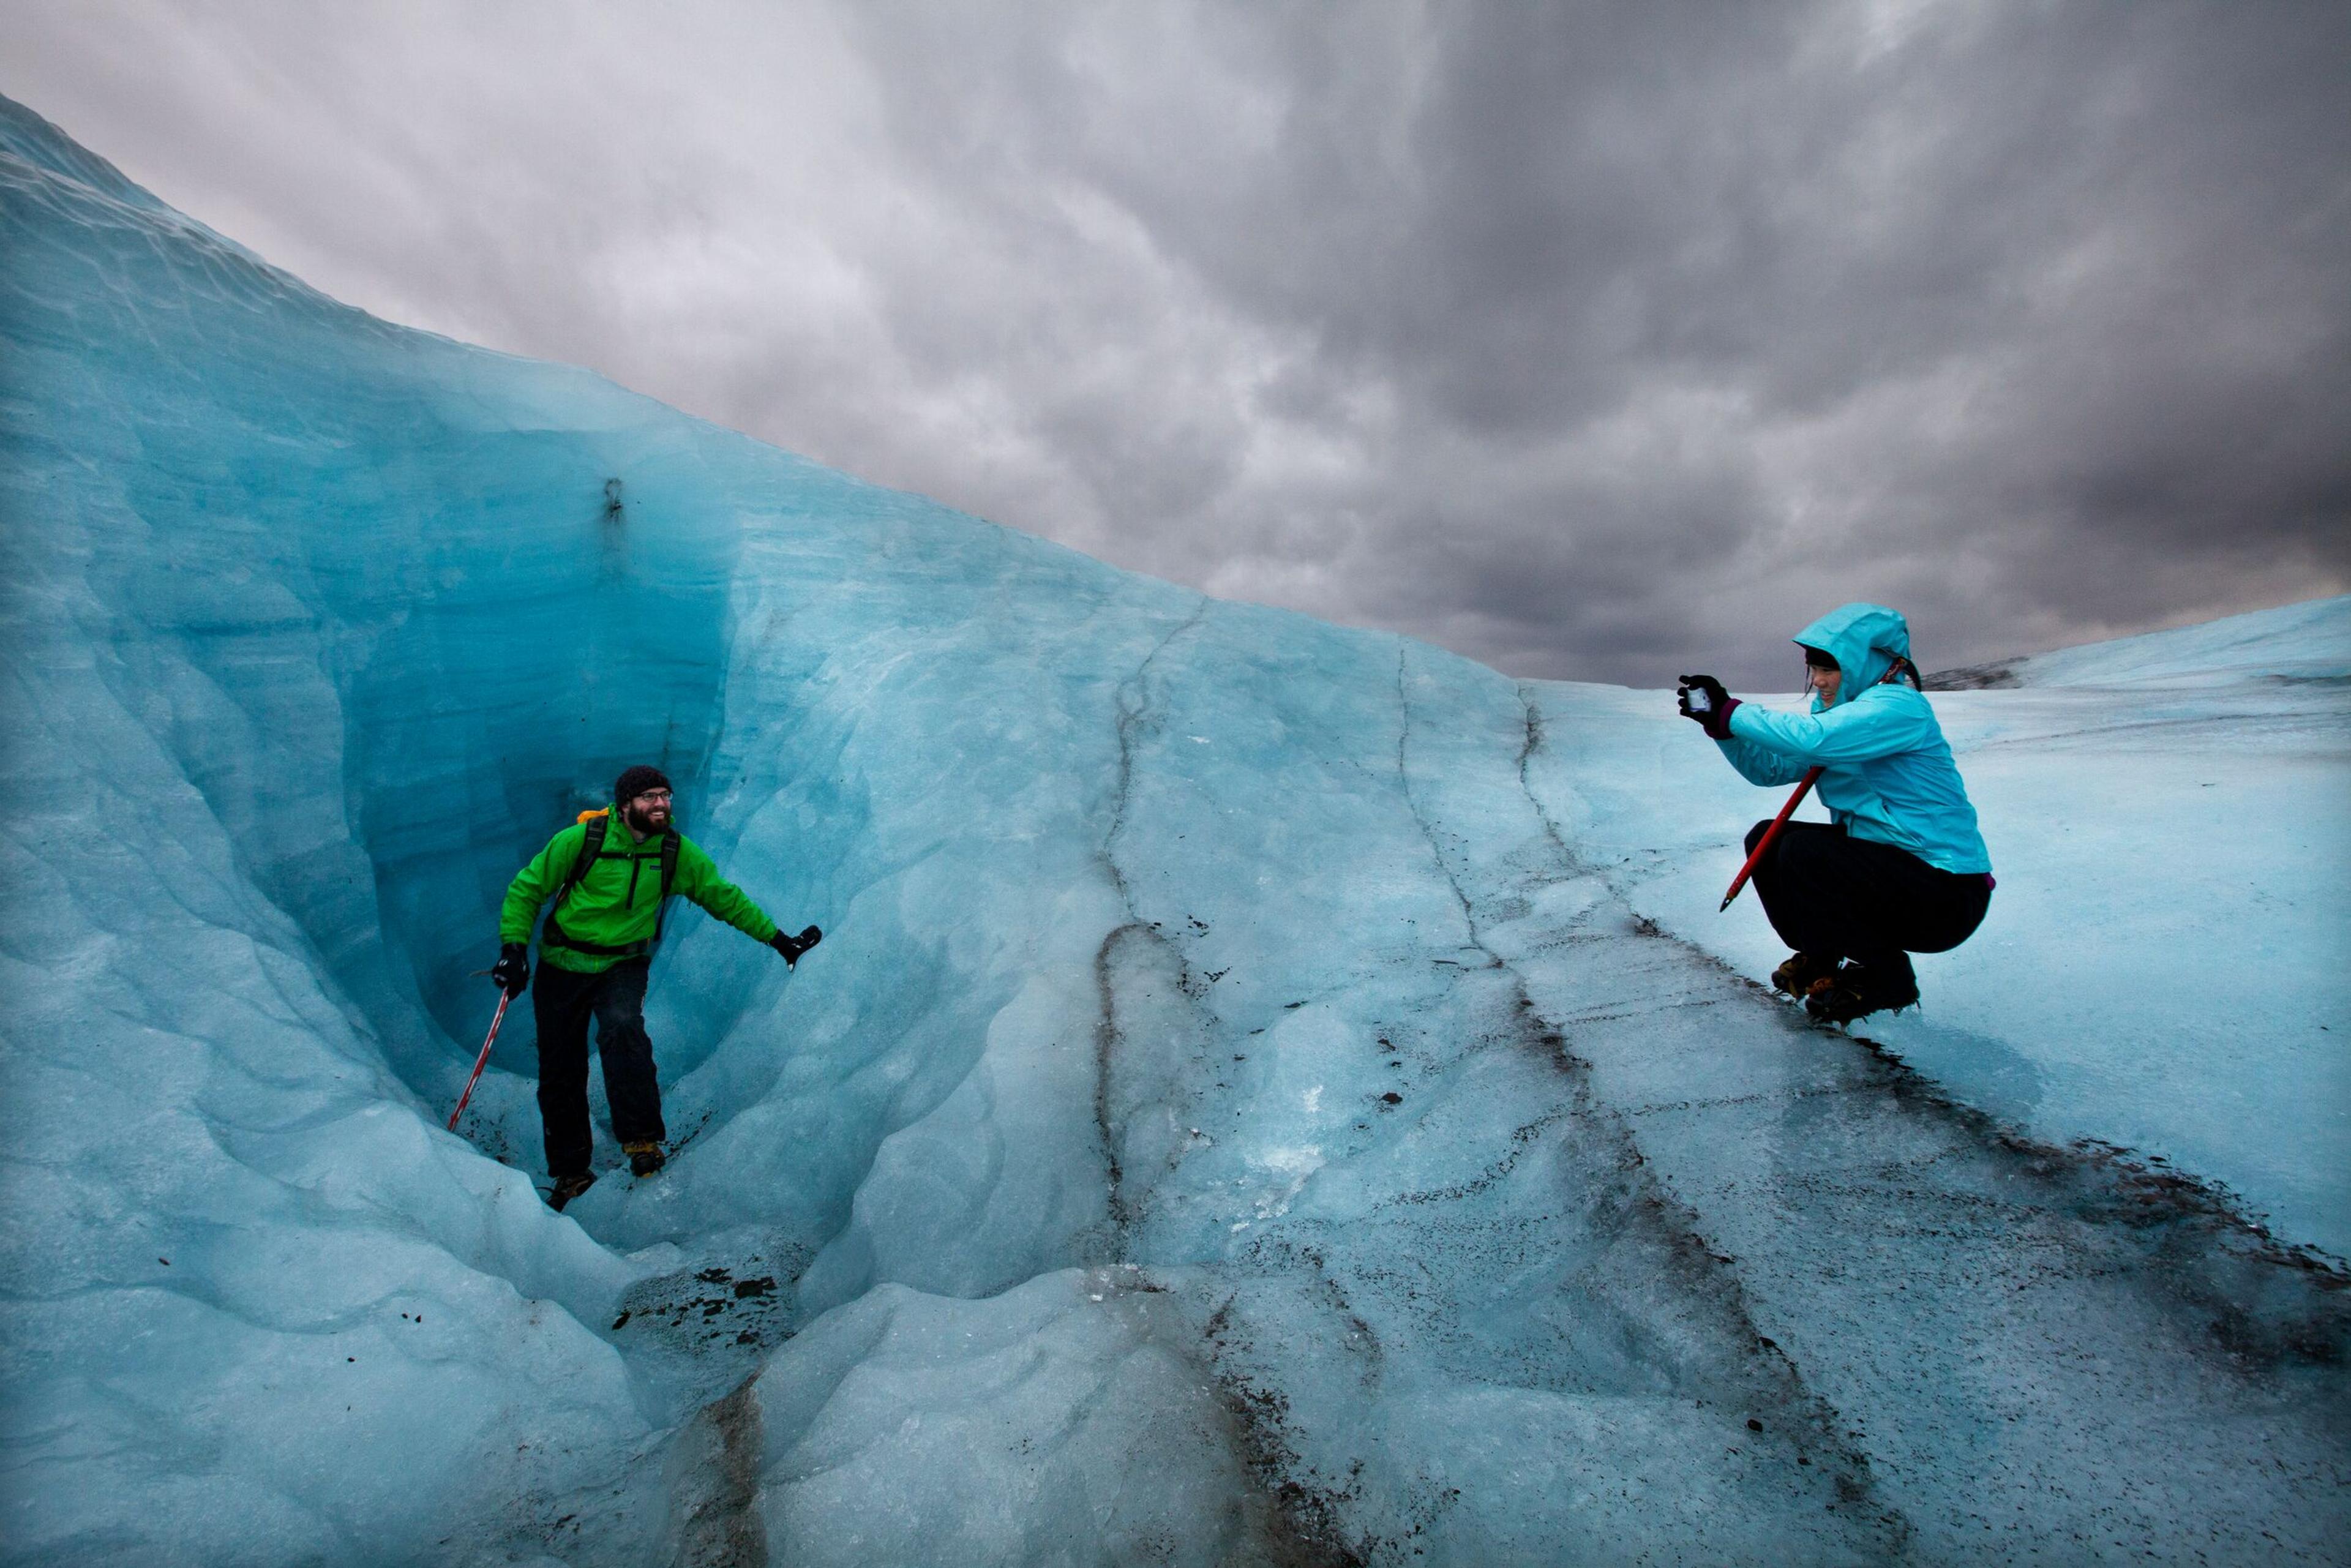 Two individuals on a blue glacier; one capturing a photo while the other strikes a pose.